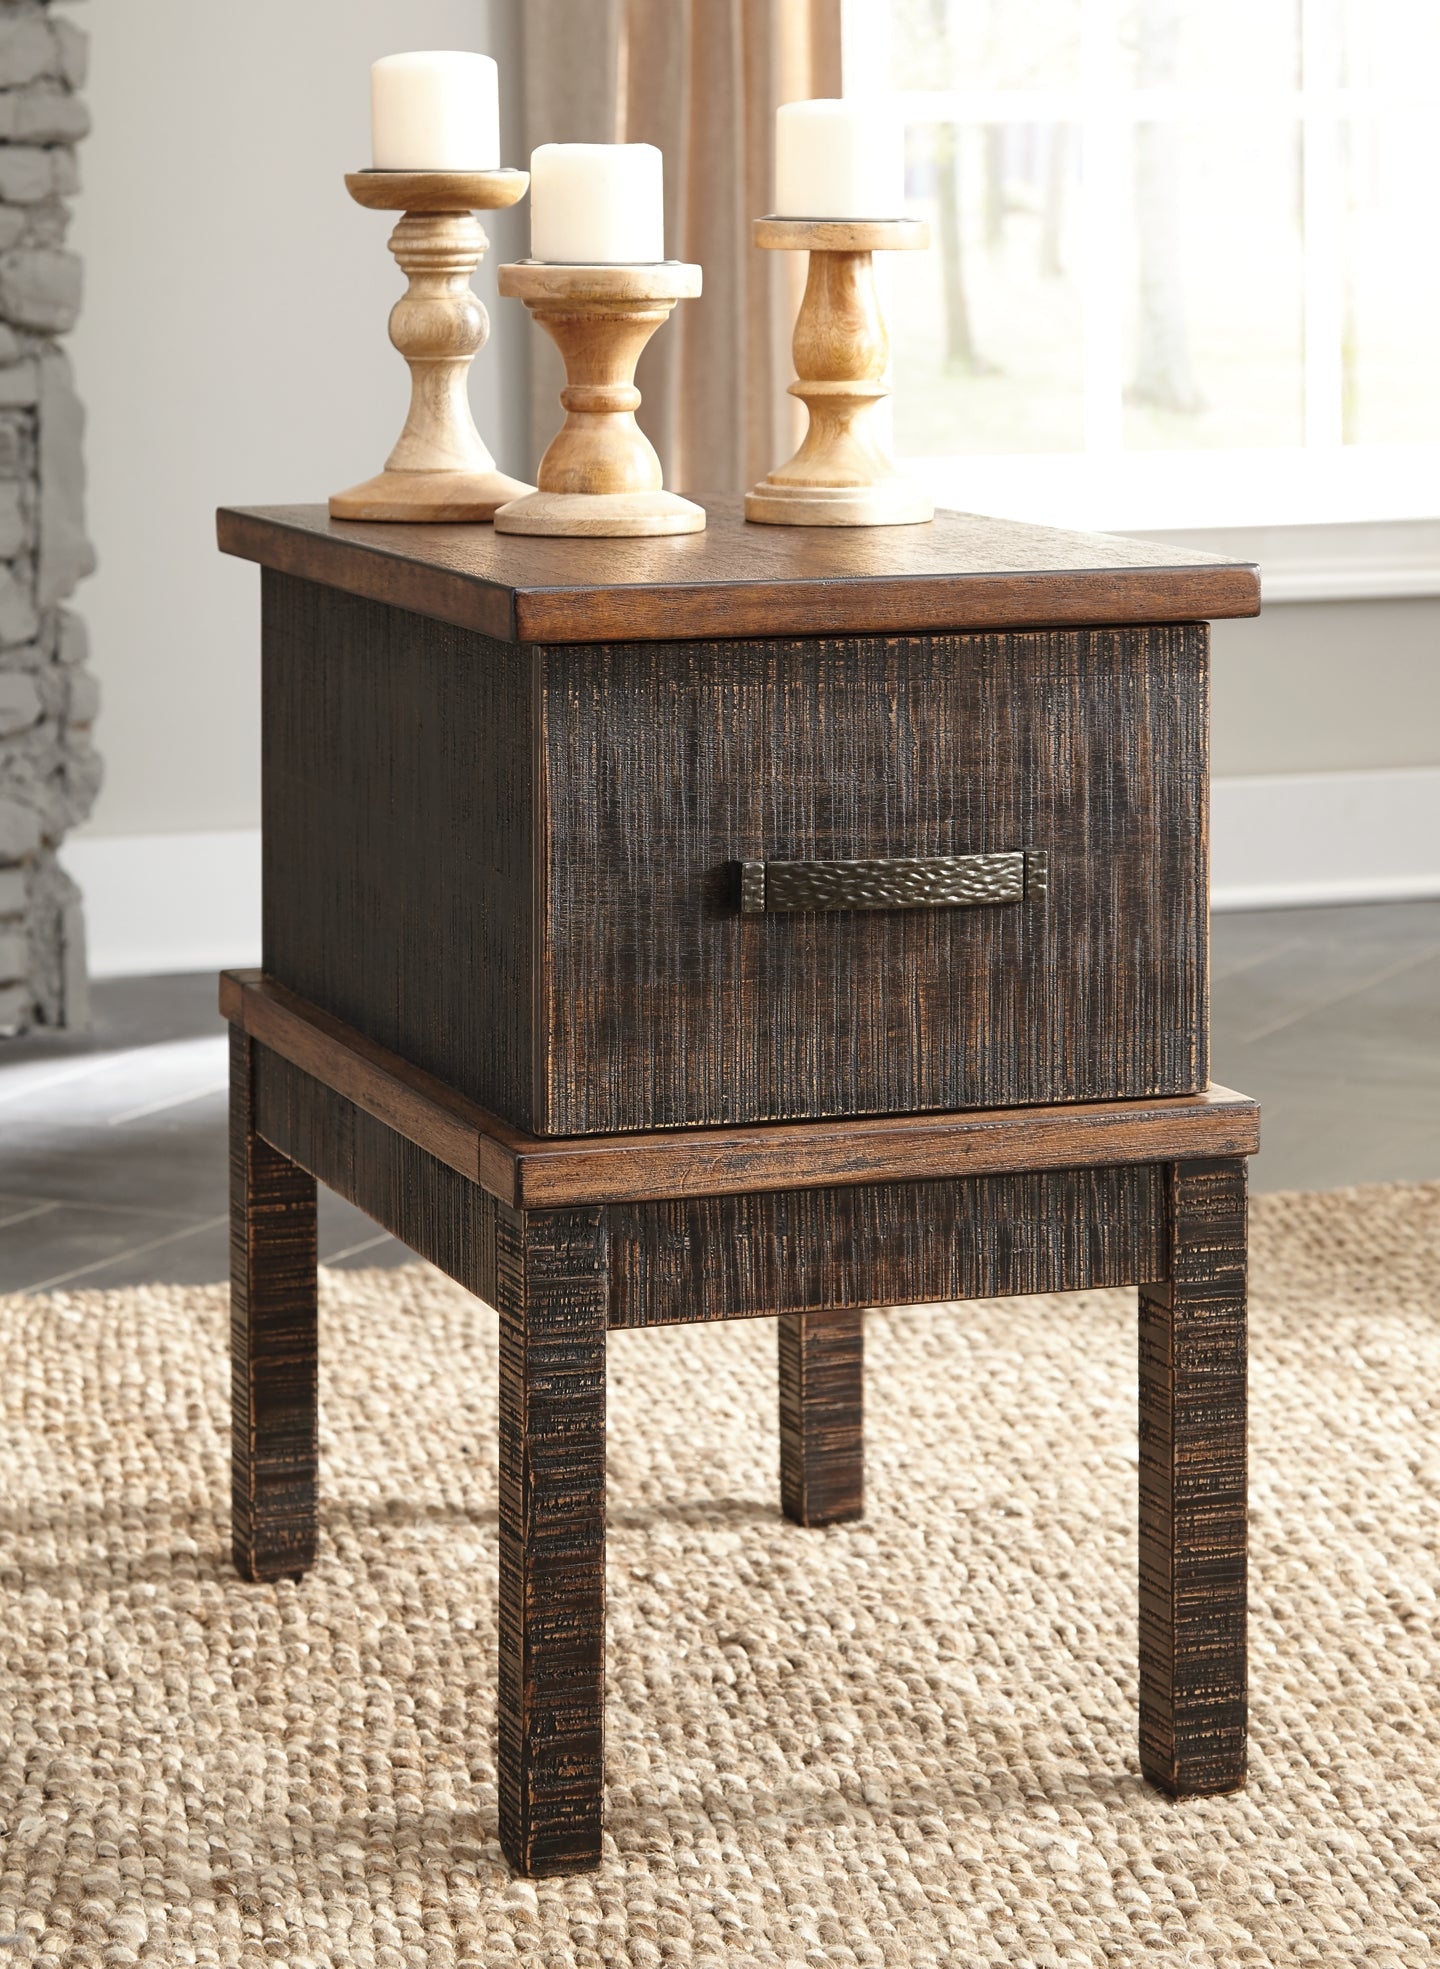 Stanah 2 End Tables at Walker Mattress and Furniture Locations in Cedar Park and Belton TX.